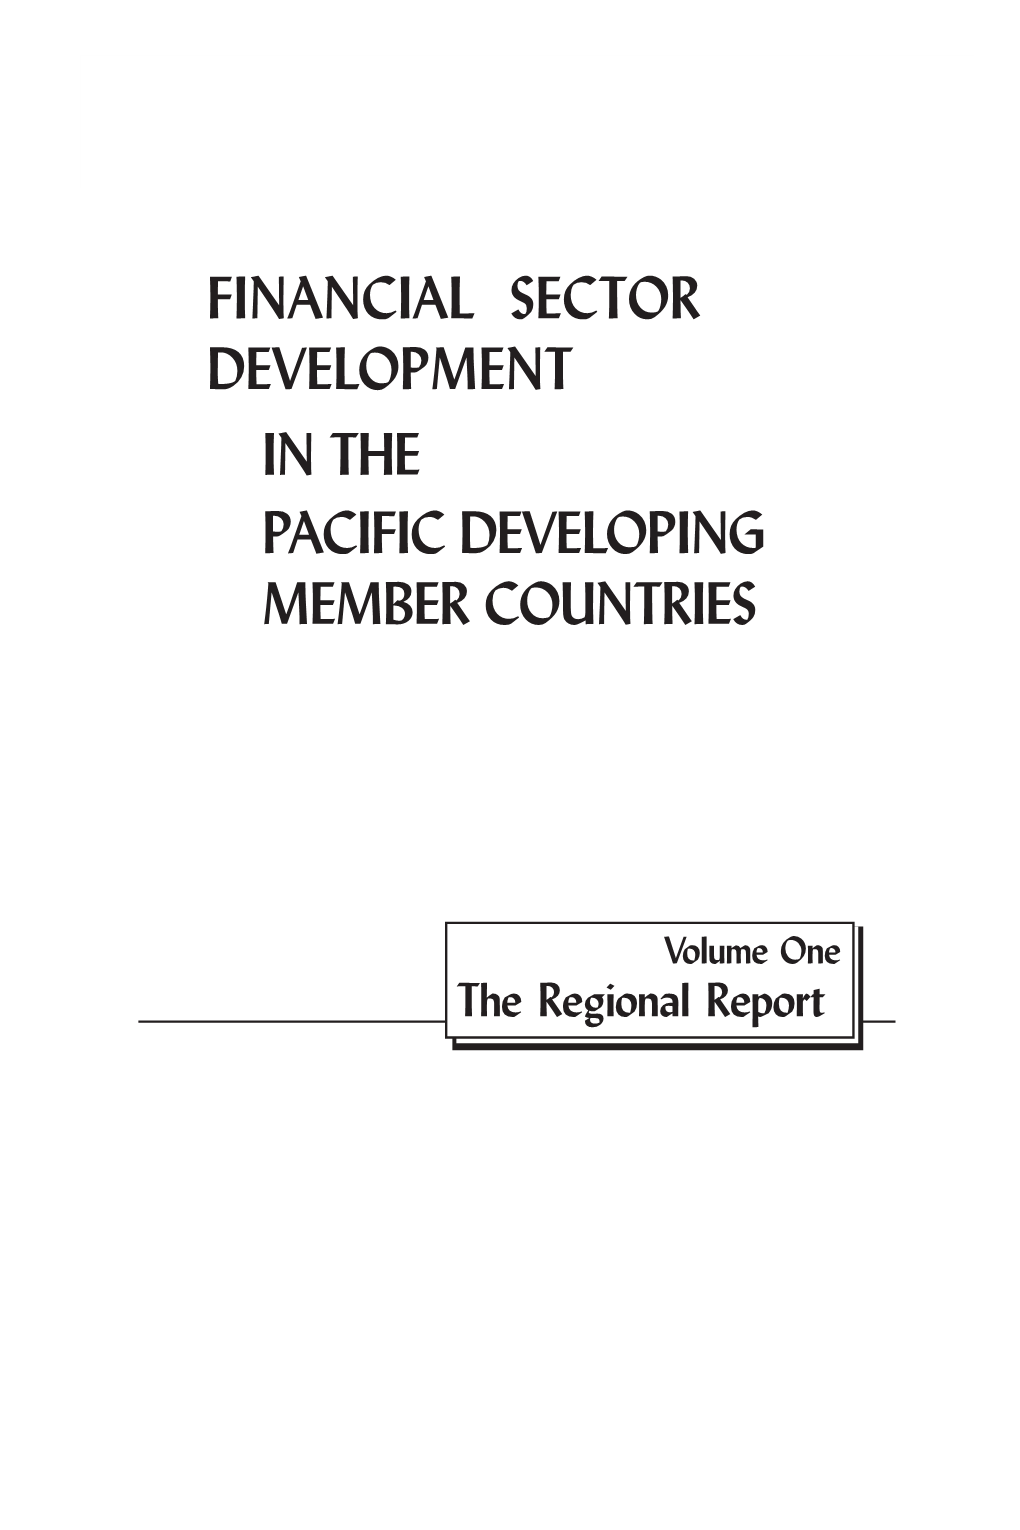 Financial Sector Development in the Pacific Developing Member Countries